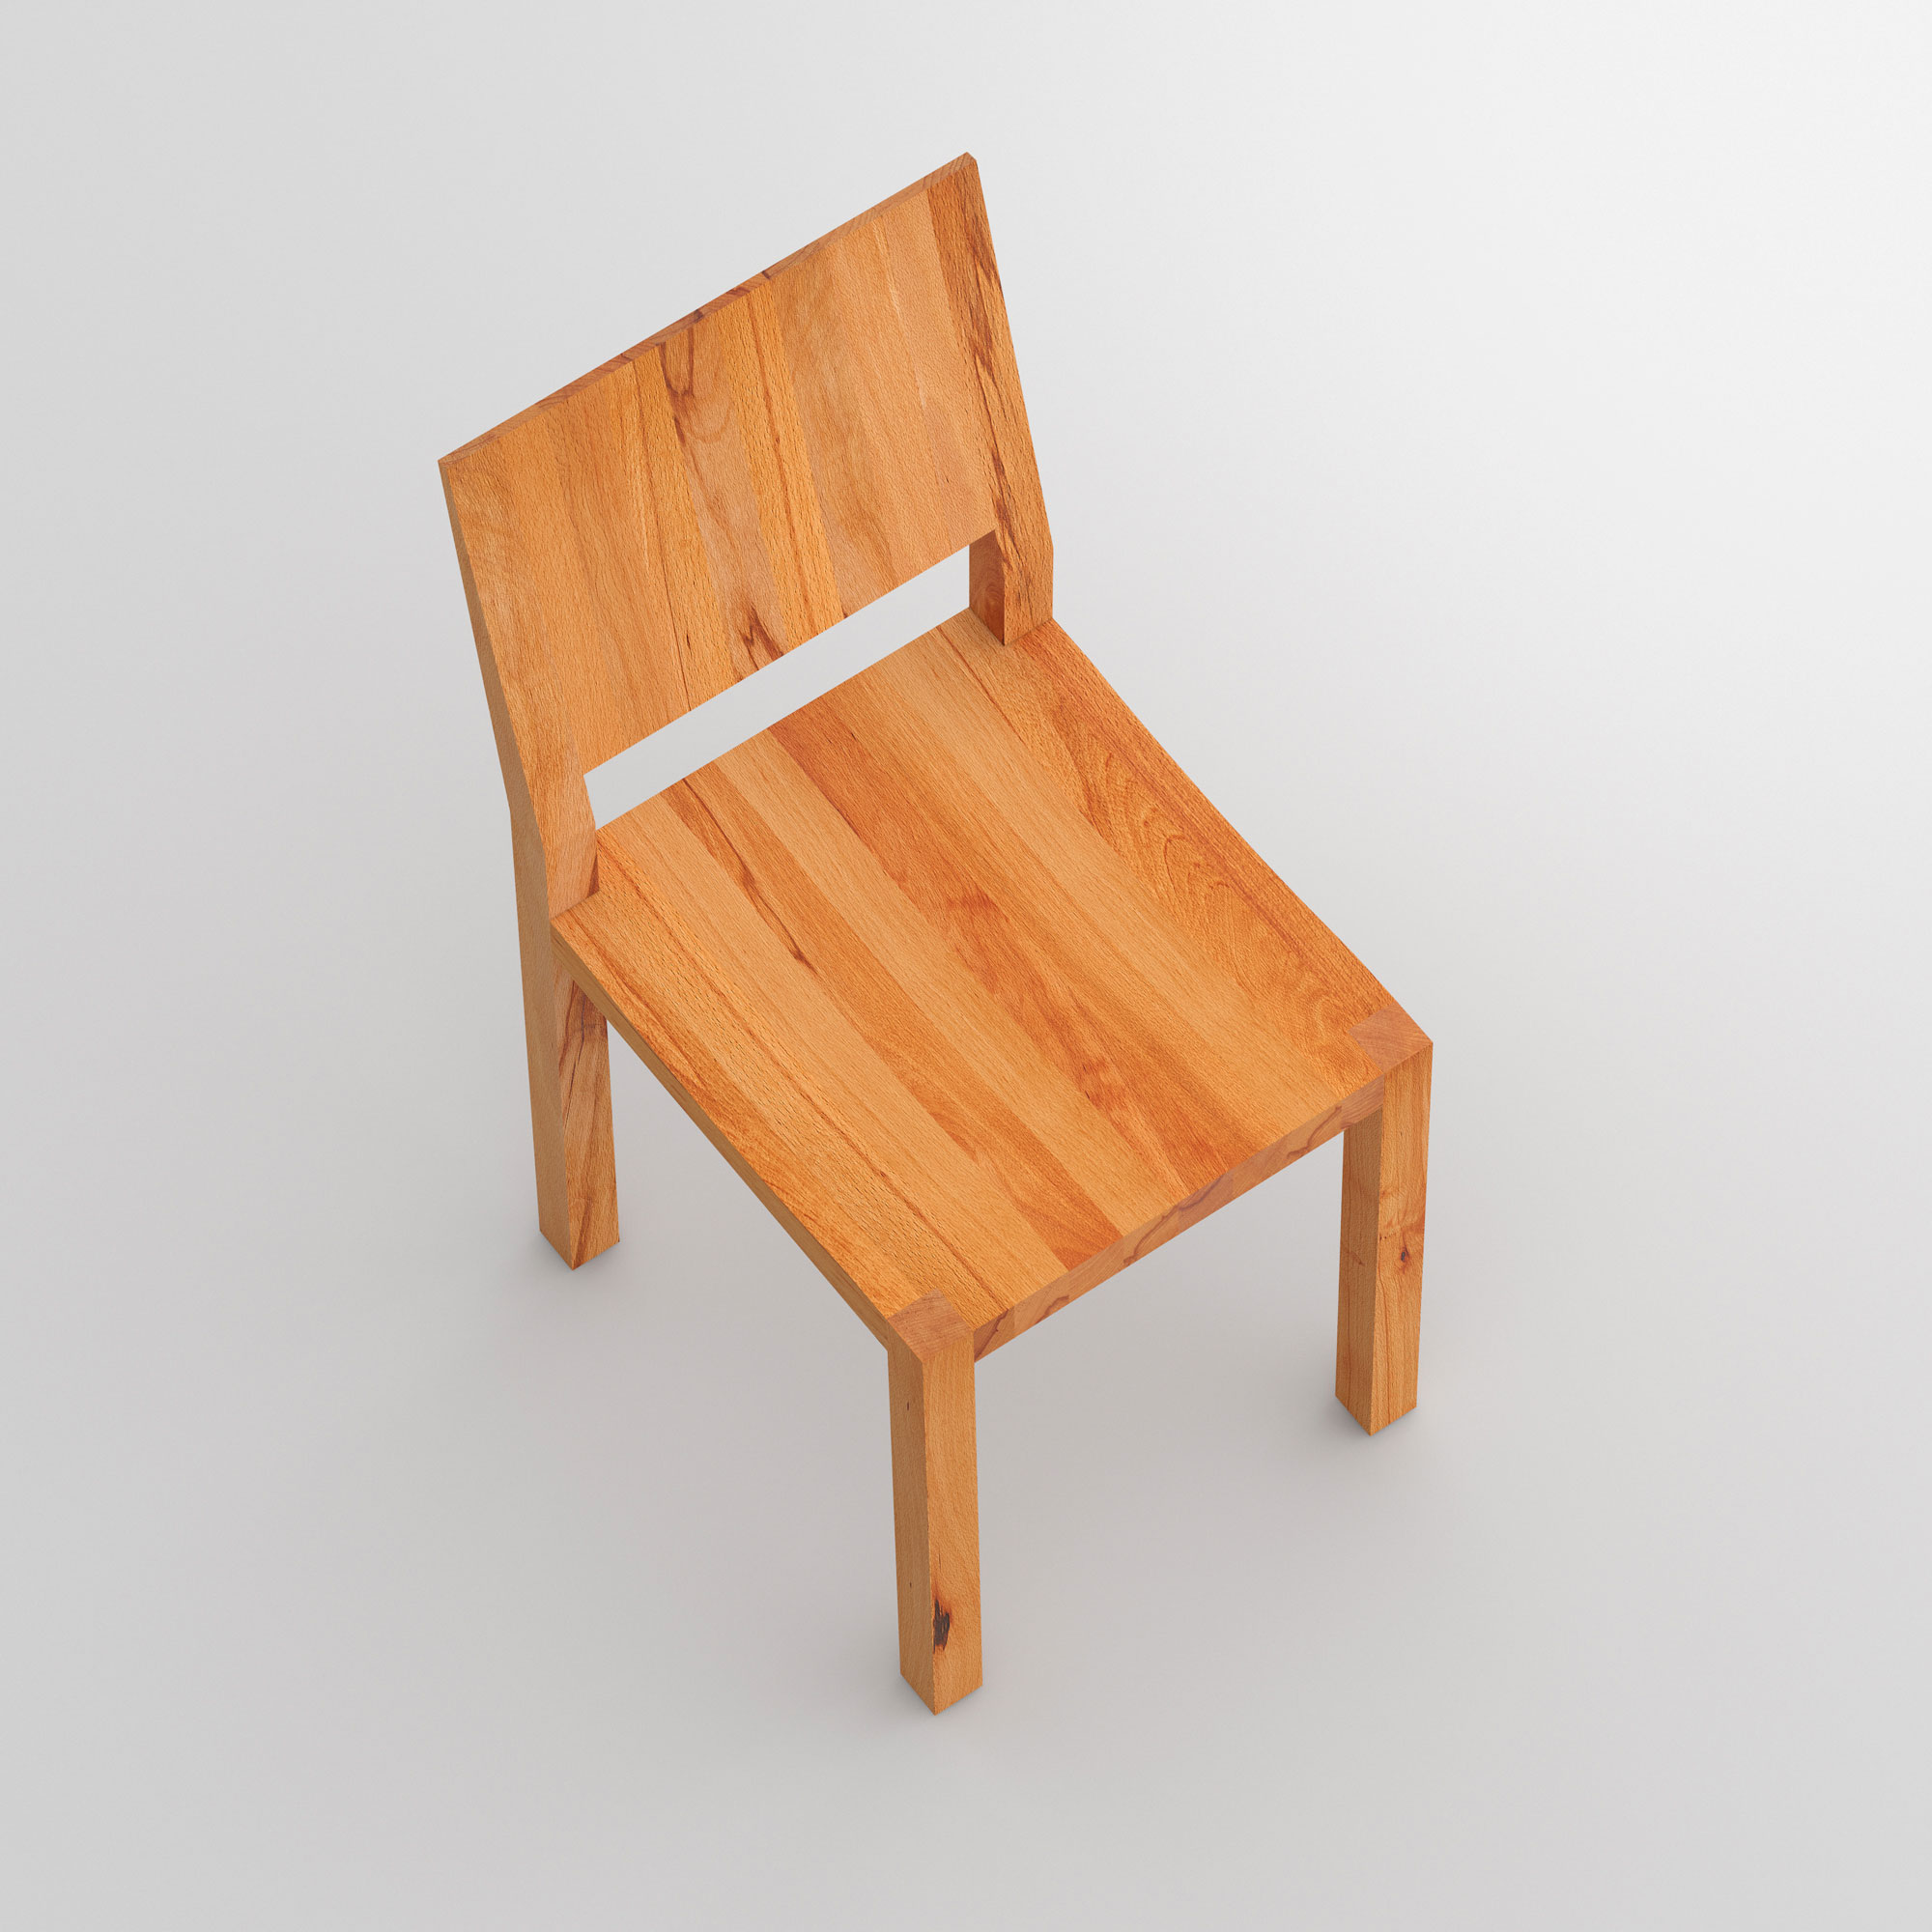 Solid Wood Chair TAU cam2 custom made in solid wood by vitamin design